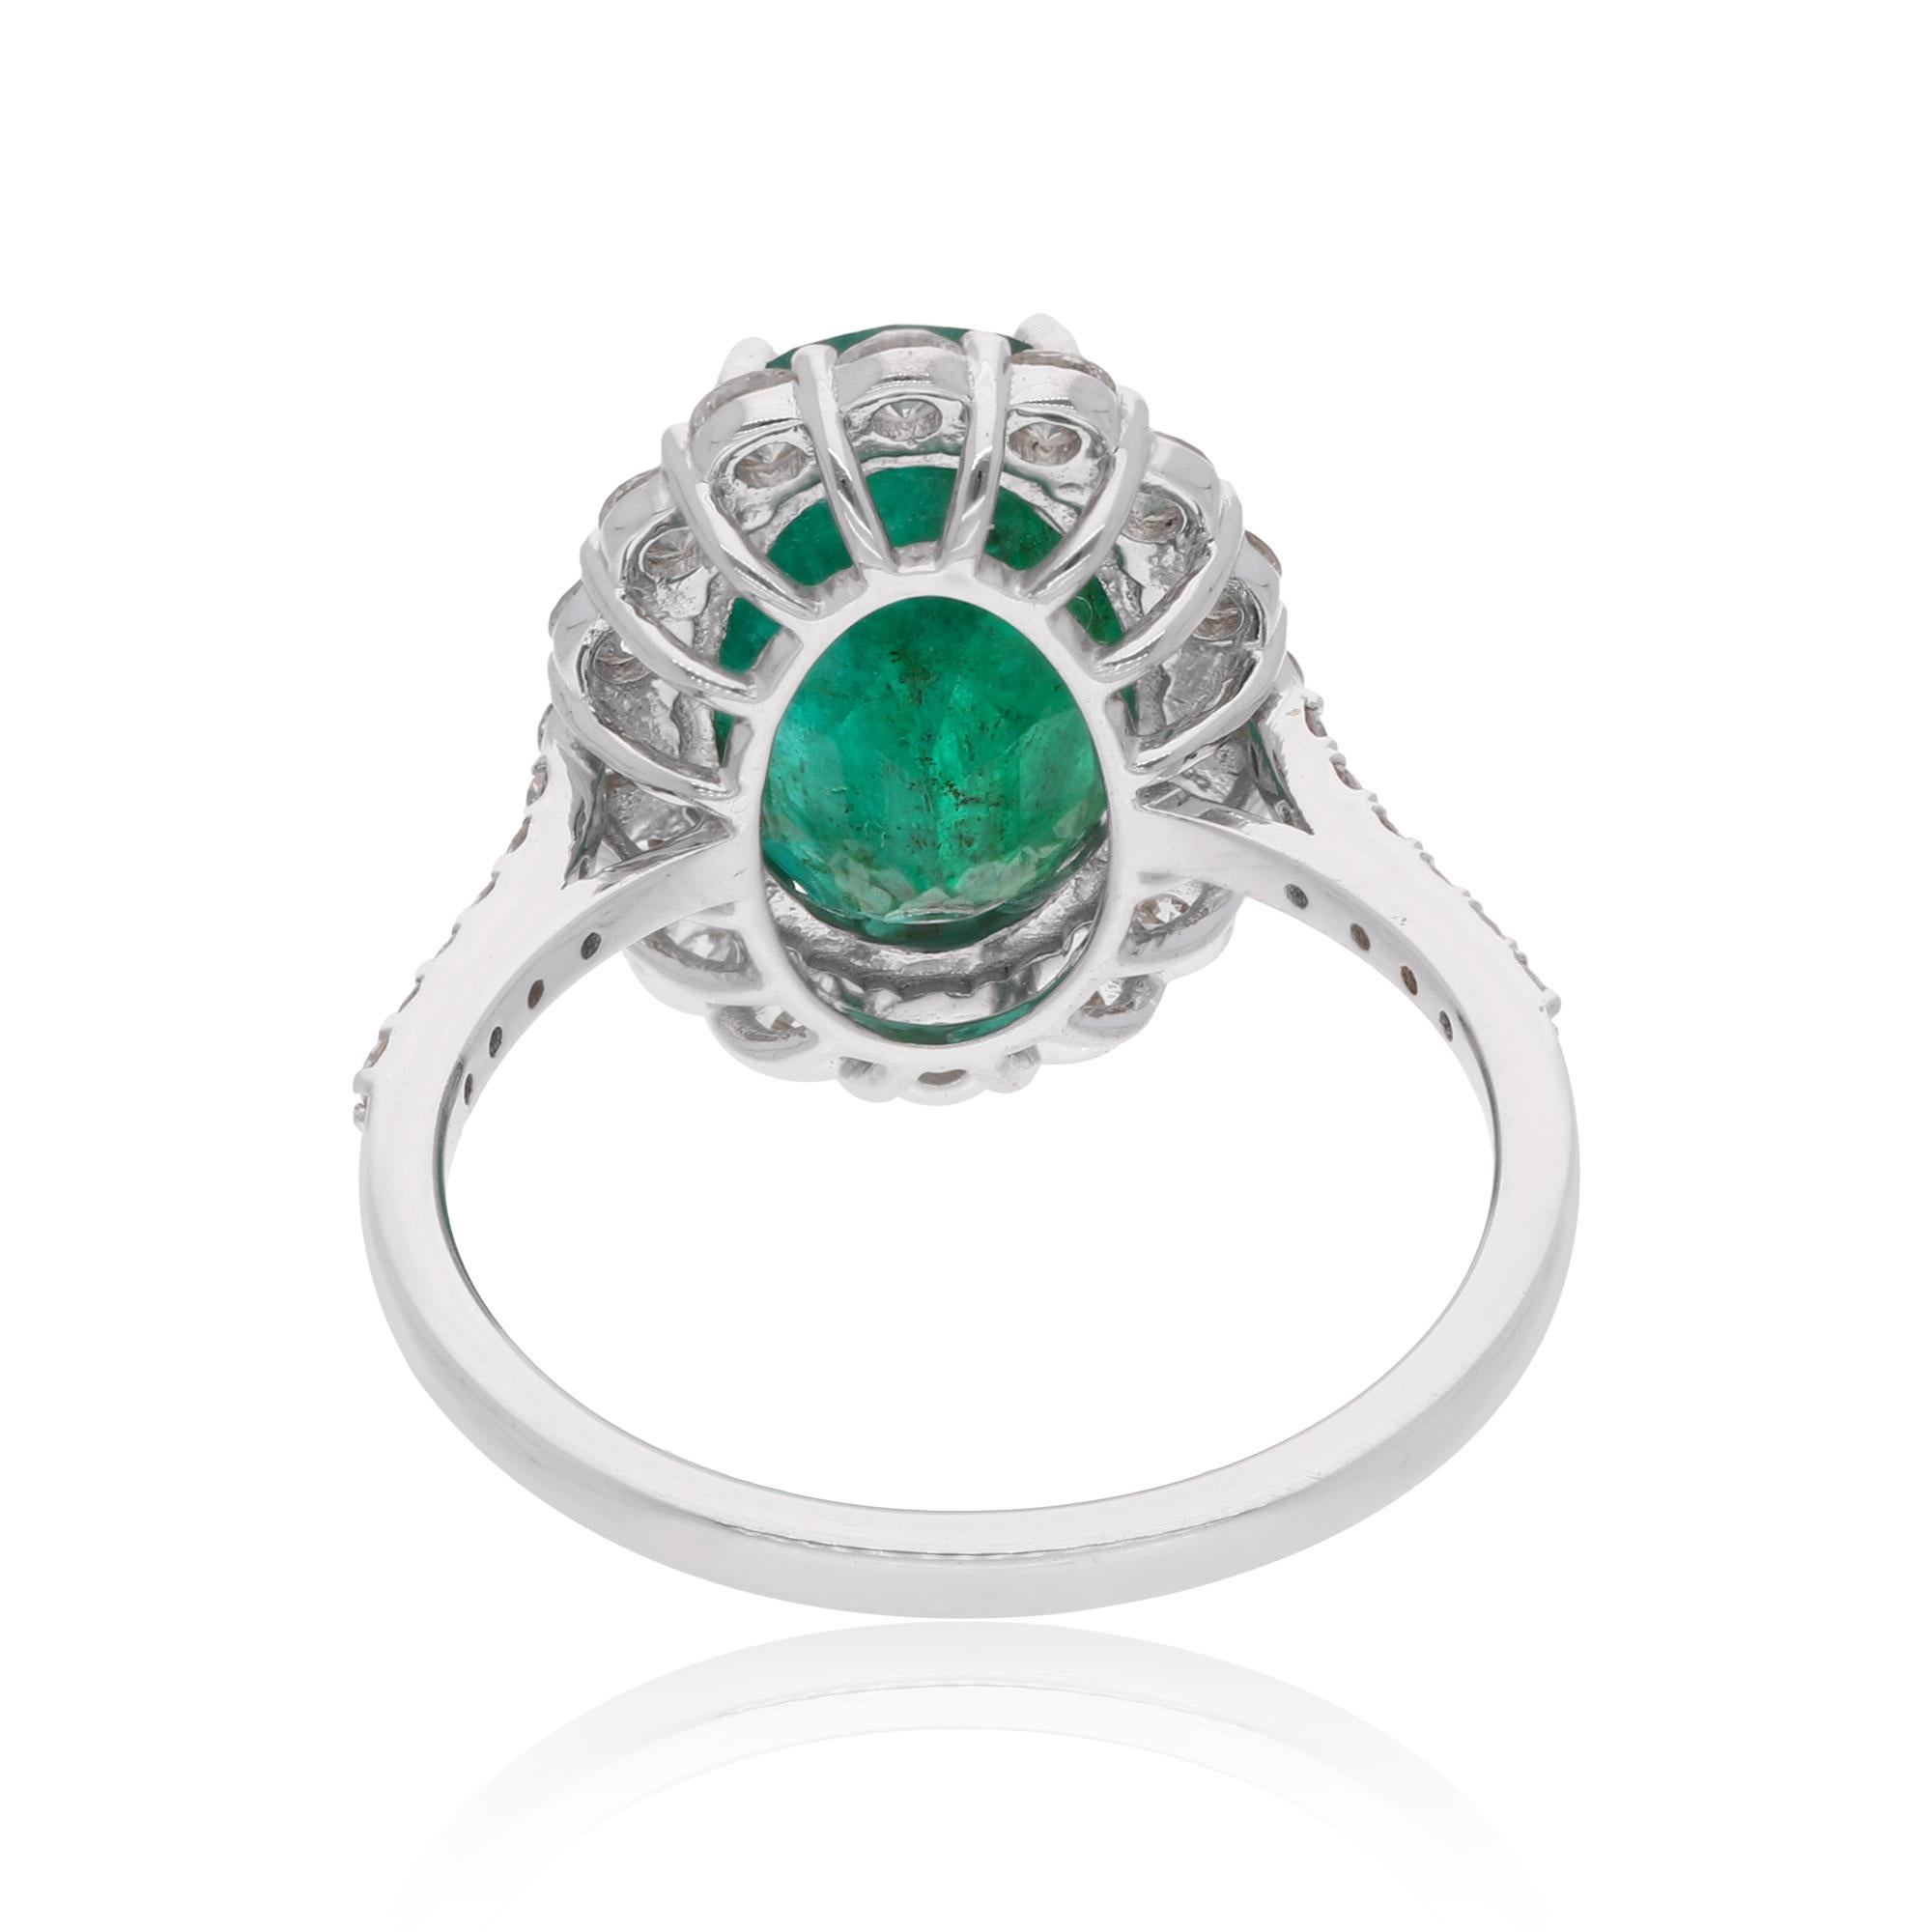 Women's Natural Emerald Gemstone Cocktail Ring Diamond Pave 18 Karat White Gold Jewelry For Sale